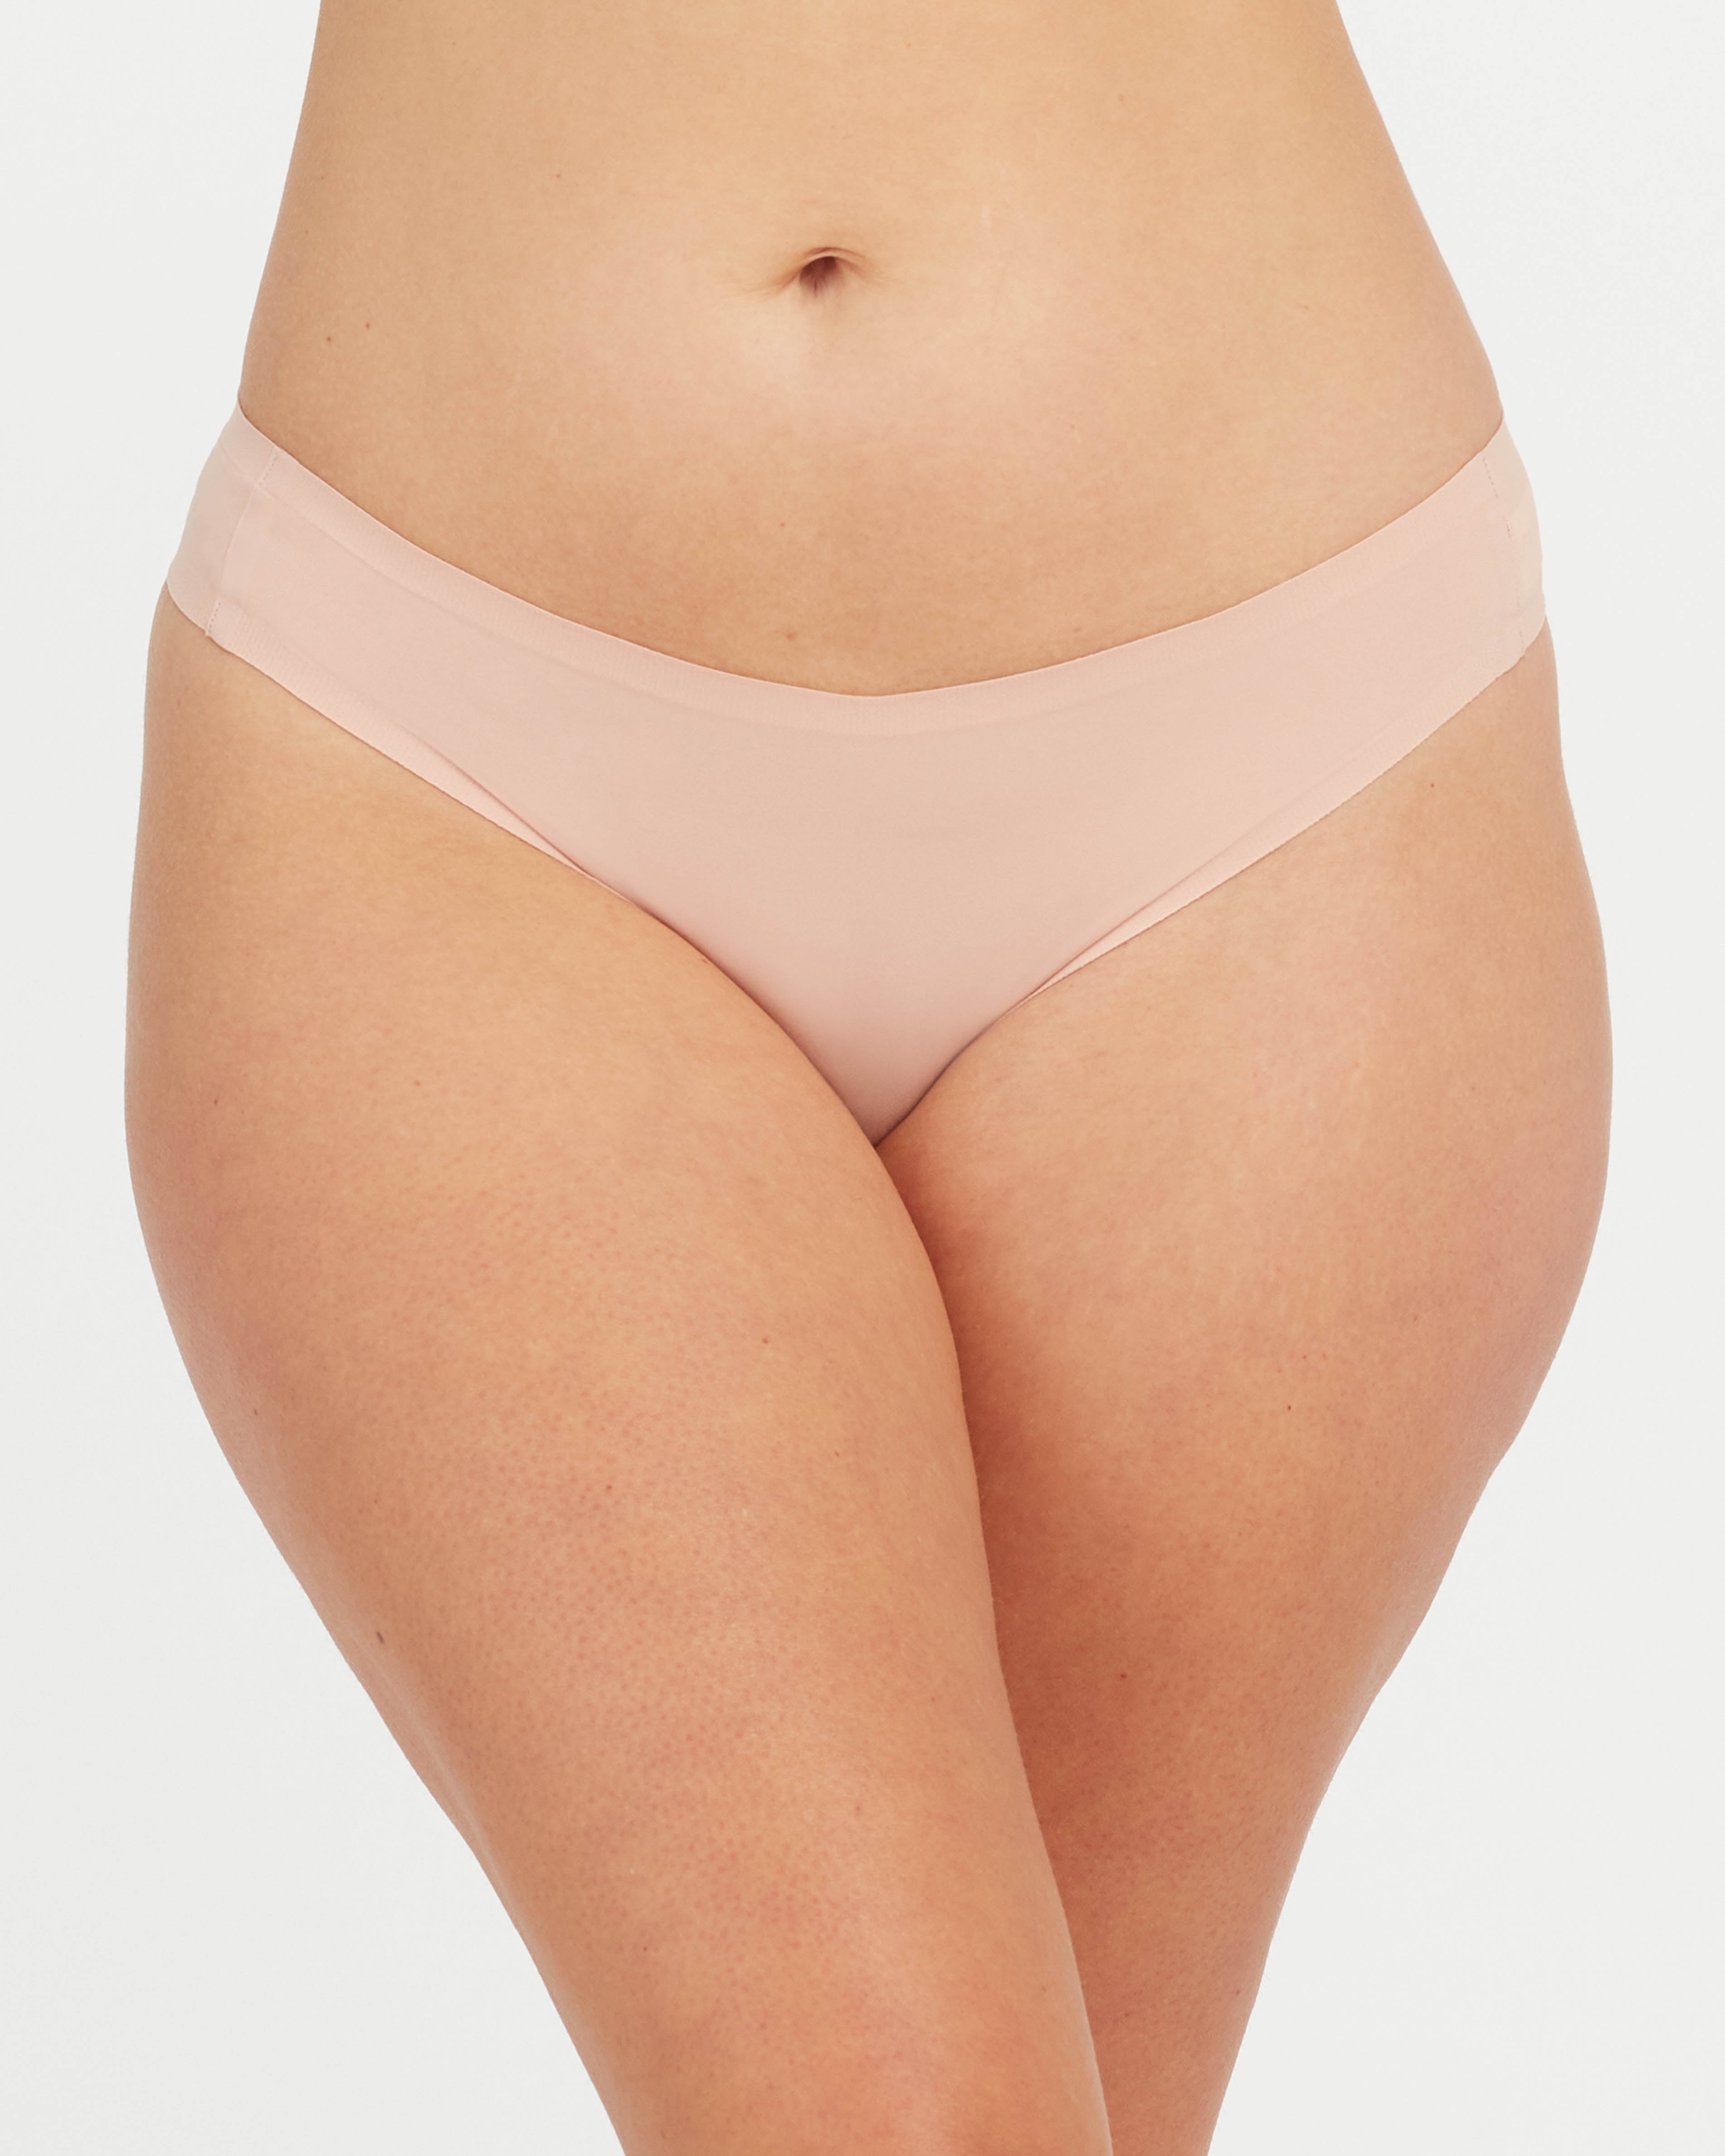 I Tried Spanx's Best-Selling Thong, and It's the Most Comfortable One I've  Ever Worn